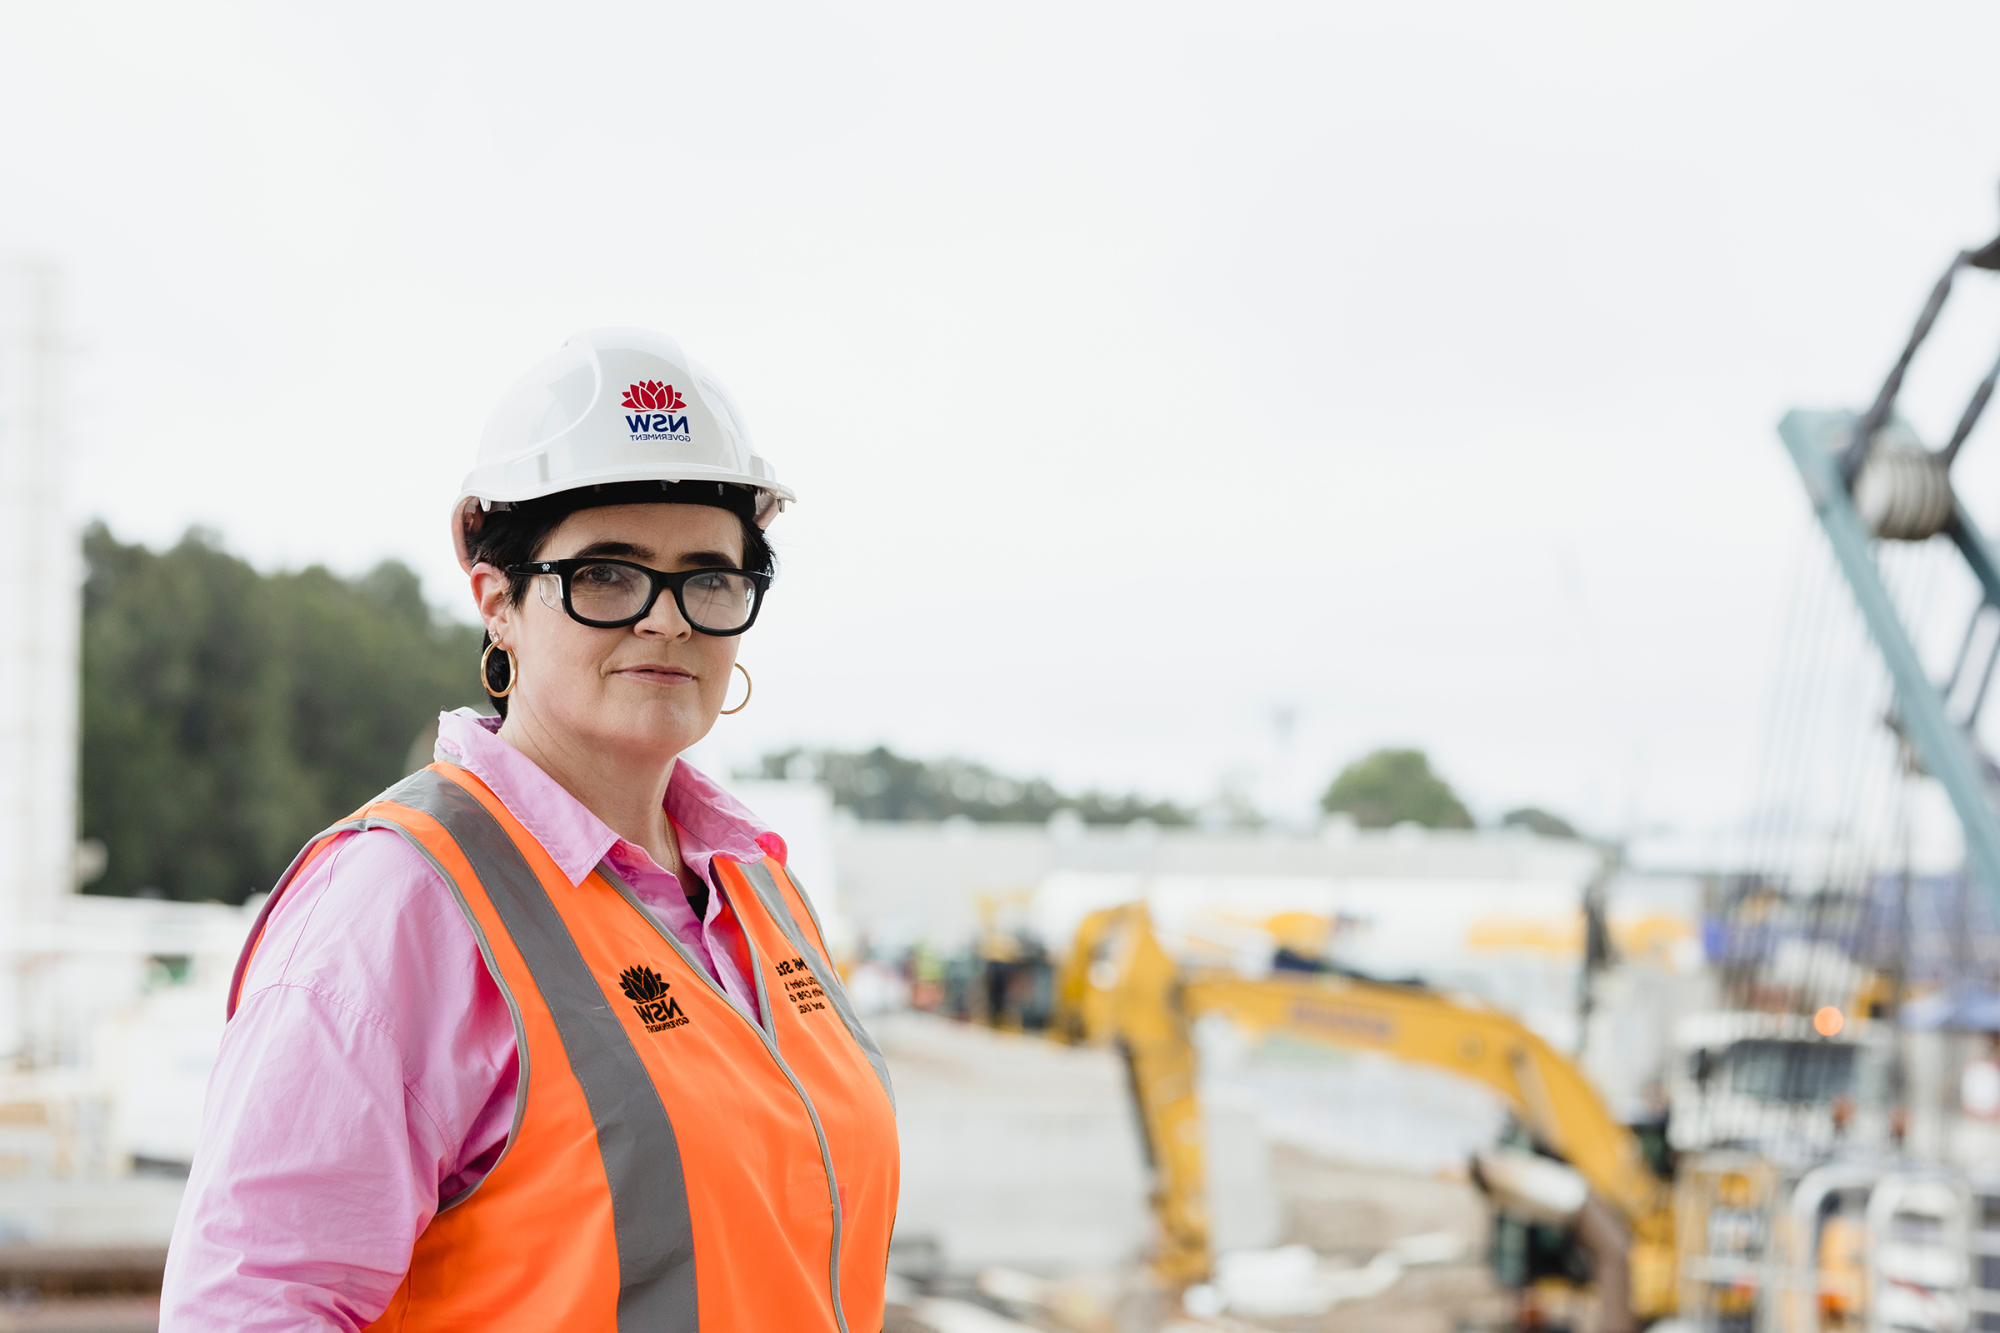 Teresa is standing in front of large machinery wearing a pink t-shirt, hi-vis vest and hard hat.